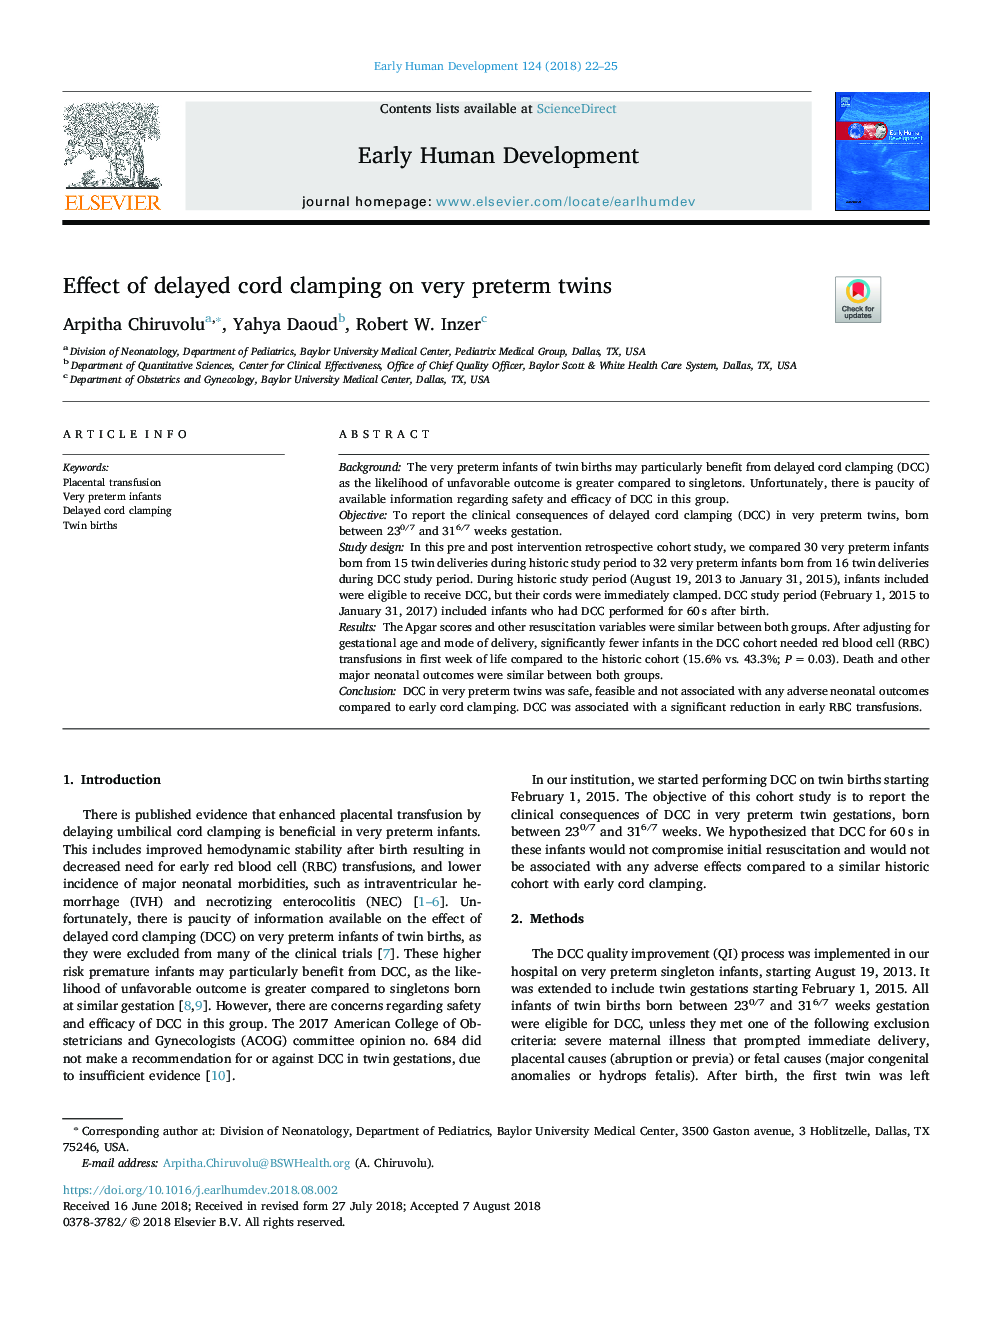 Effect of delayed cord clamping on very preterm twins